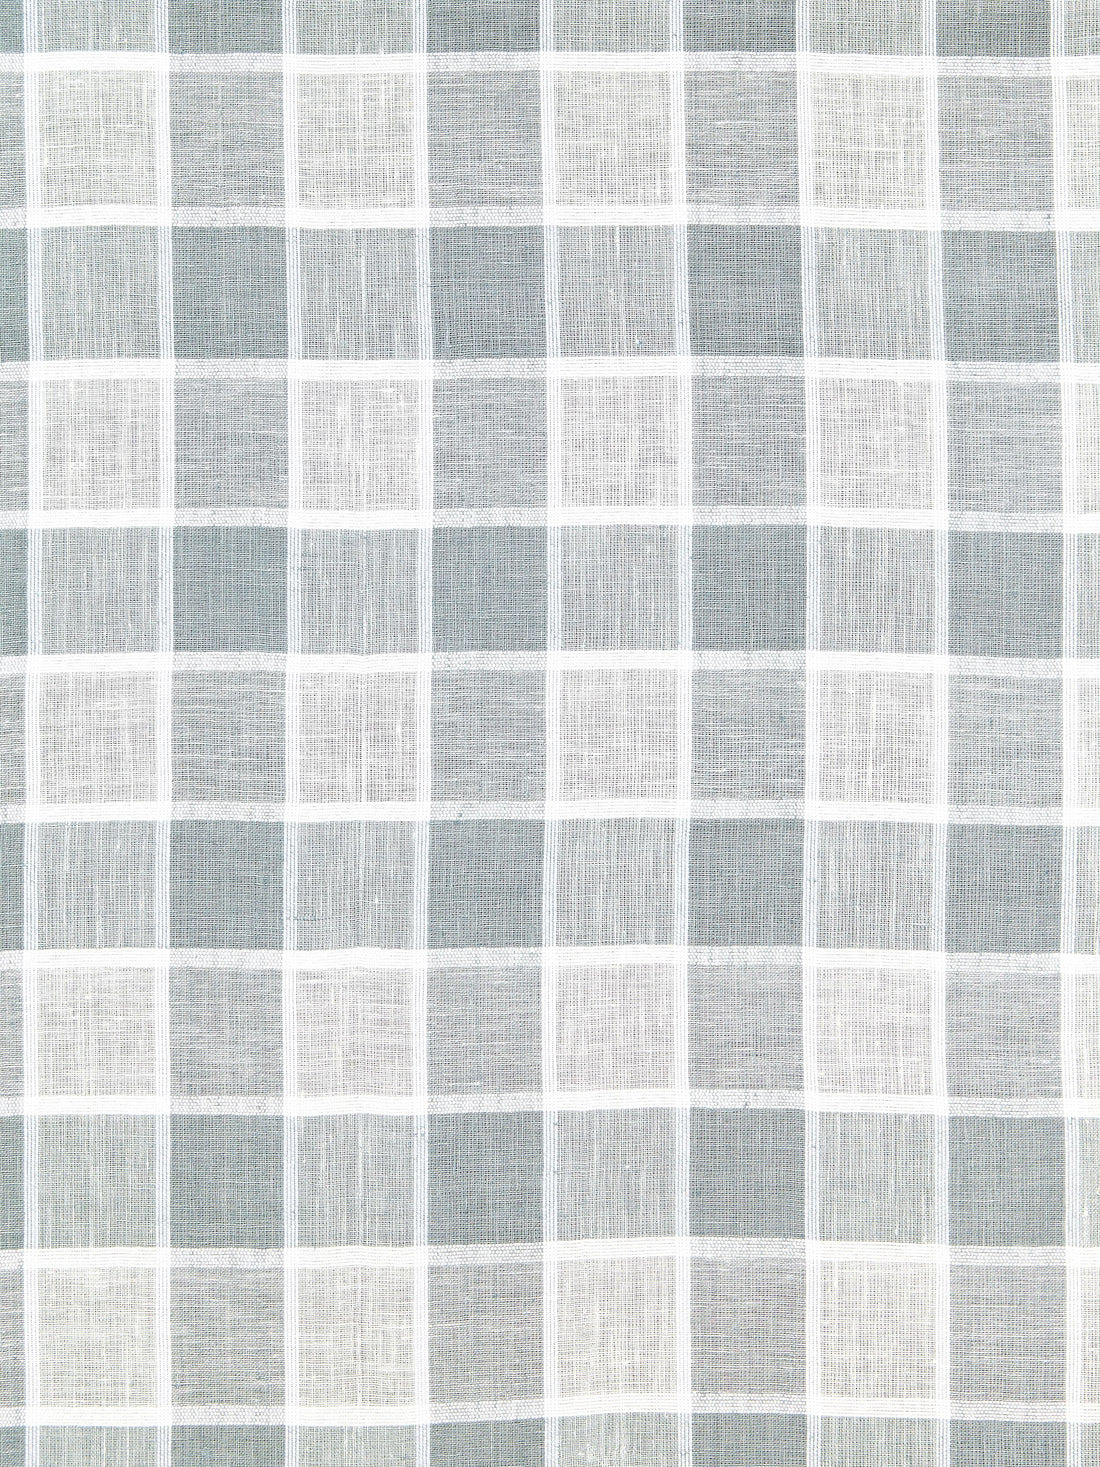 Wainscott Check Sheer fabric in haze color - pattern number SC 000227043 - by Scalamandre in the Scalamandre Fabrics Book 1 collection